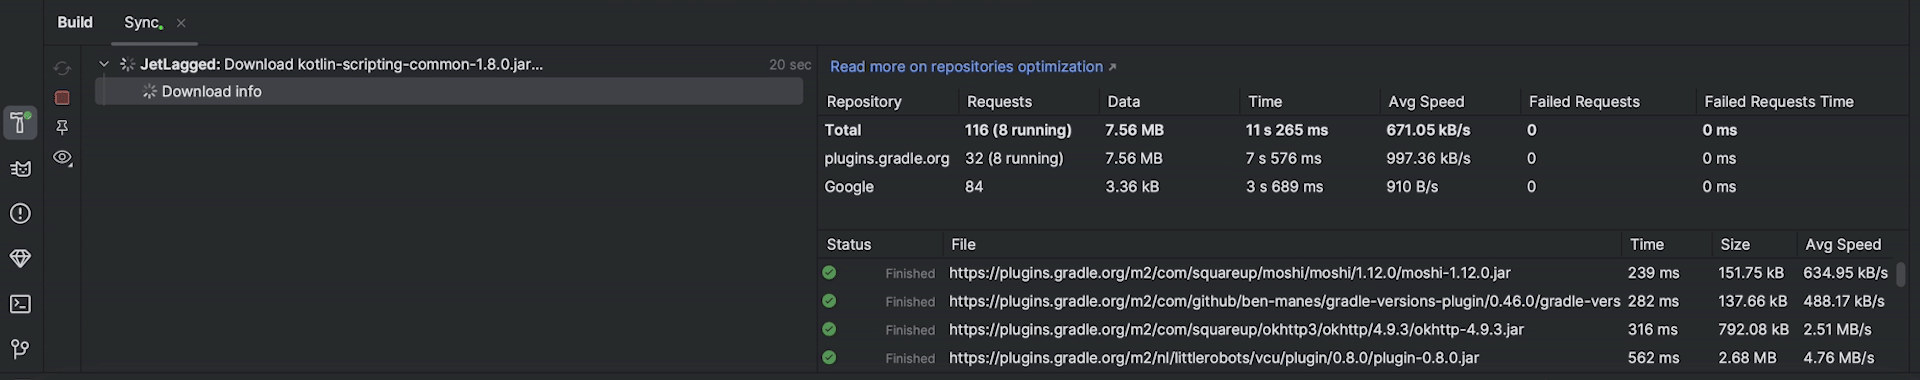 Moving image showing download info during gradle sync